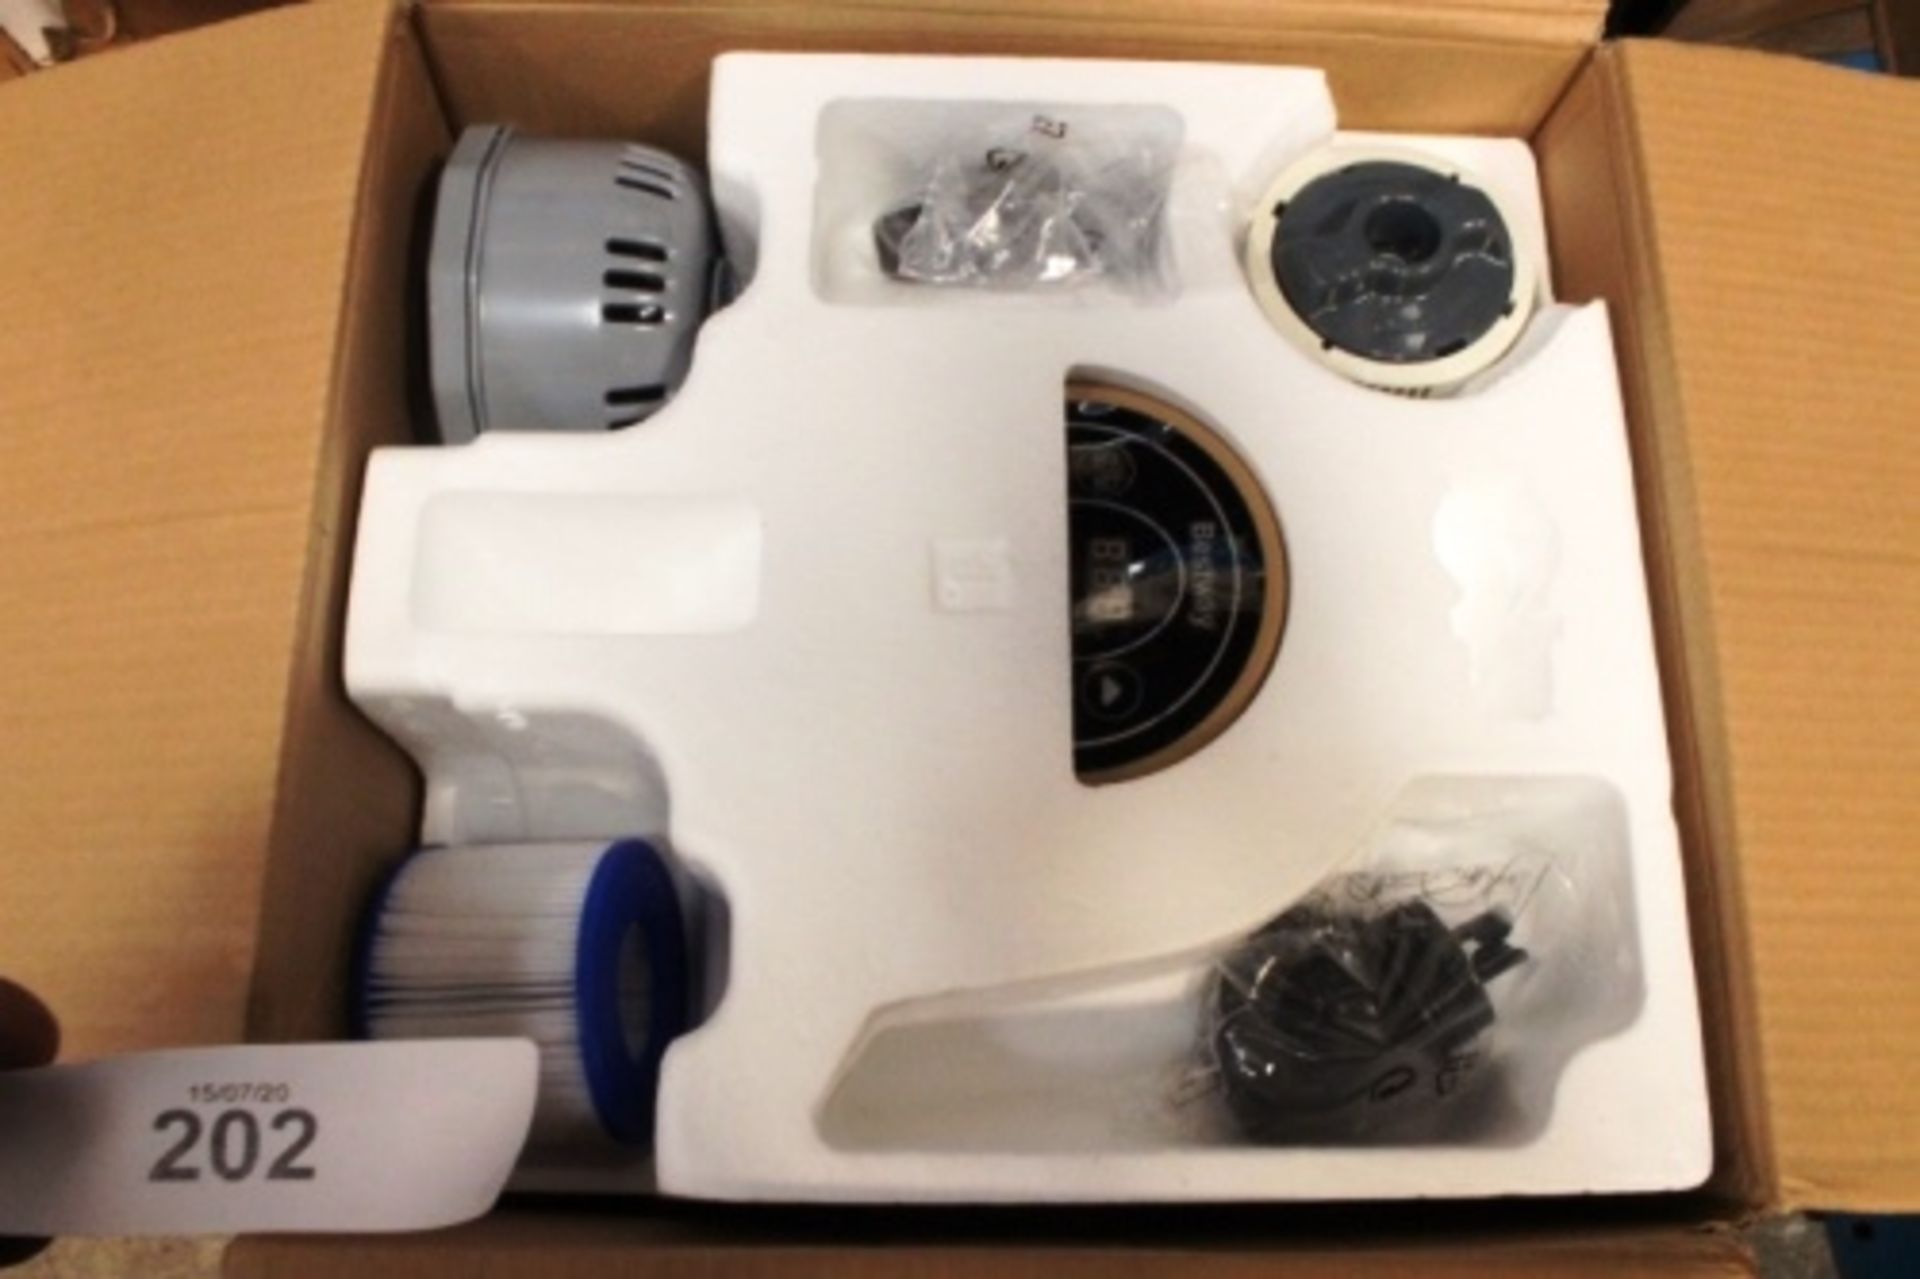 1 x Bestway Jacuzzi pump, model 204002002299 - New in box, box open, unchecked (GS16)